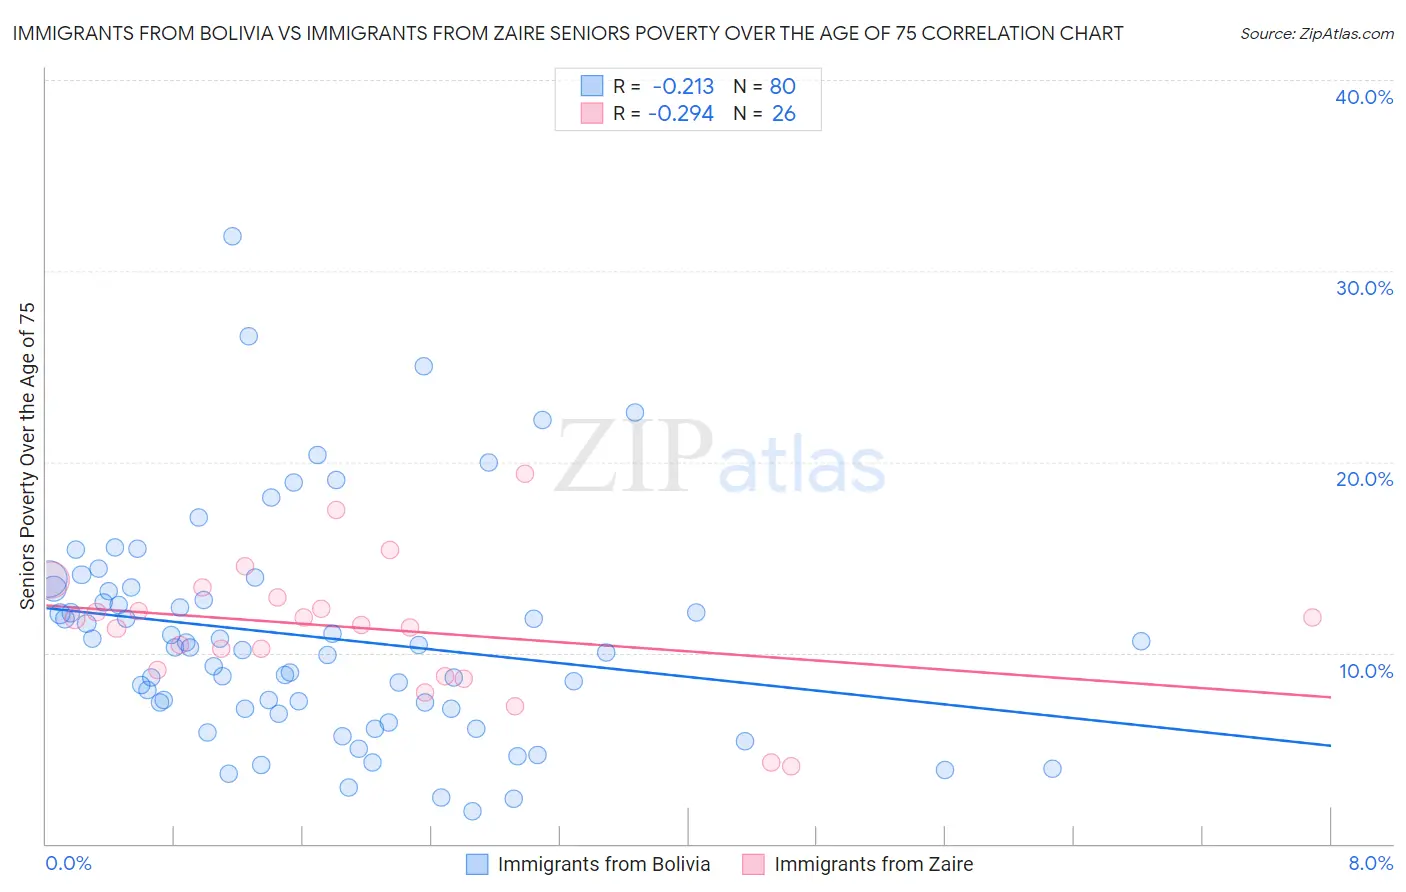 Immigrants from Bolivia vs Immigrants from Zaire Seniors Poverty Over the Age of 75